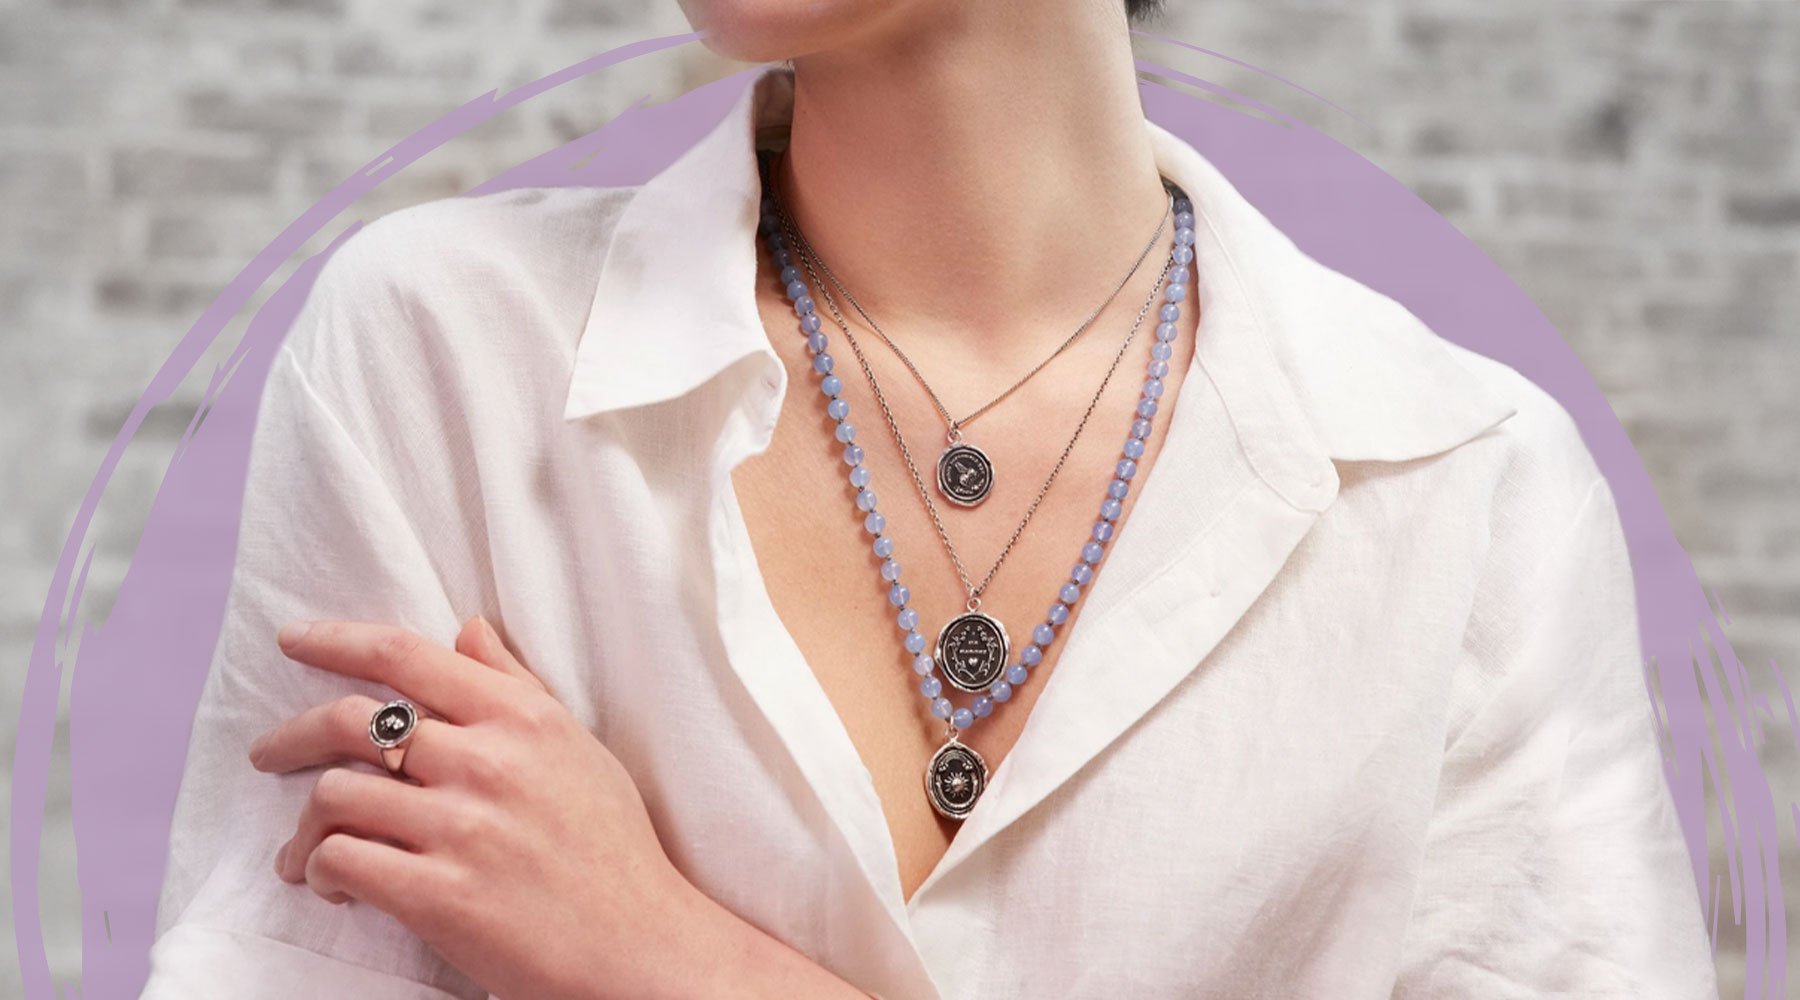 Guide: Finding the Best Necklace for Your Neckline